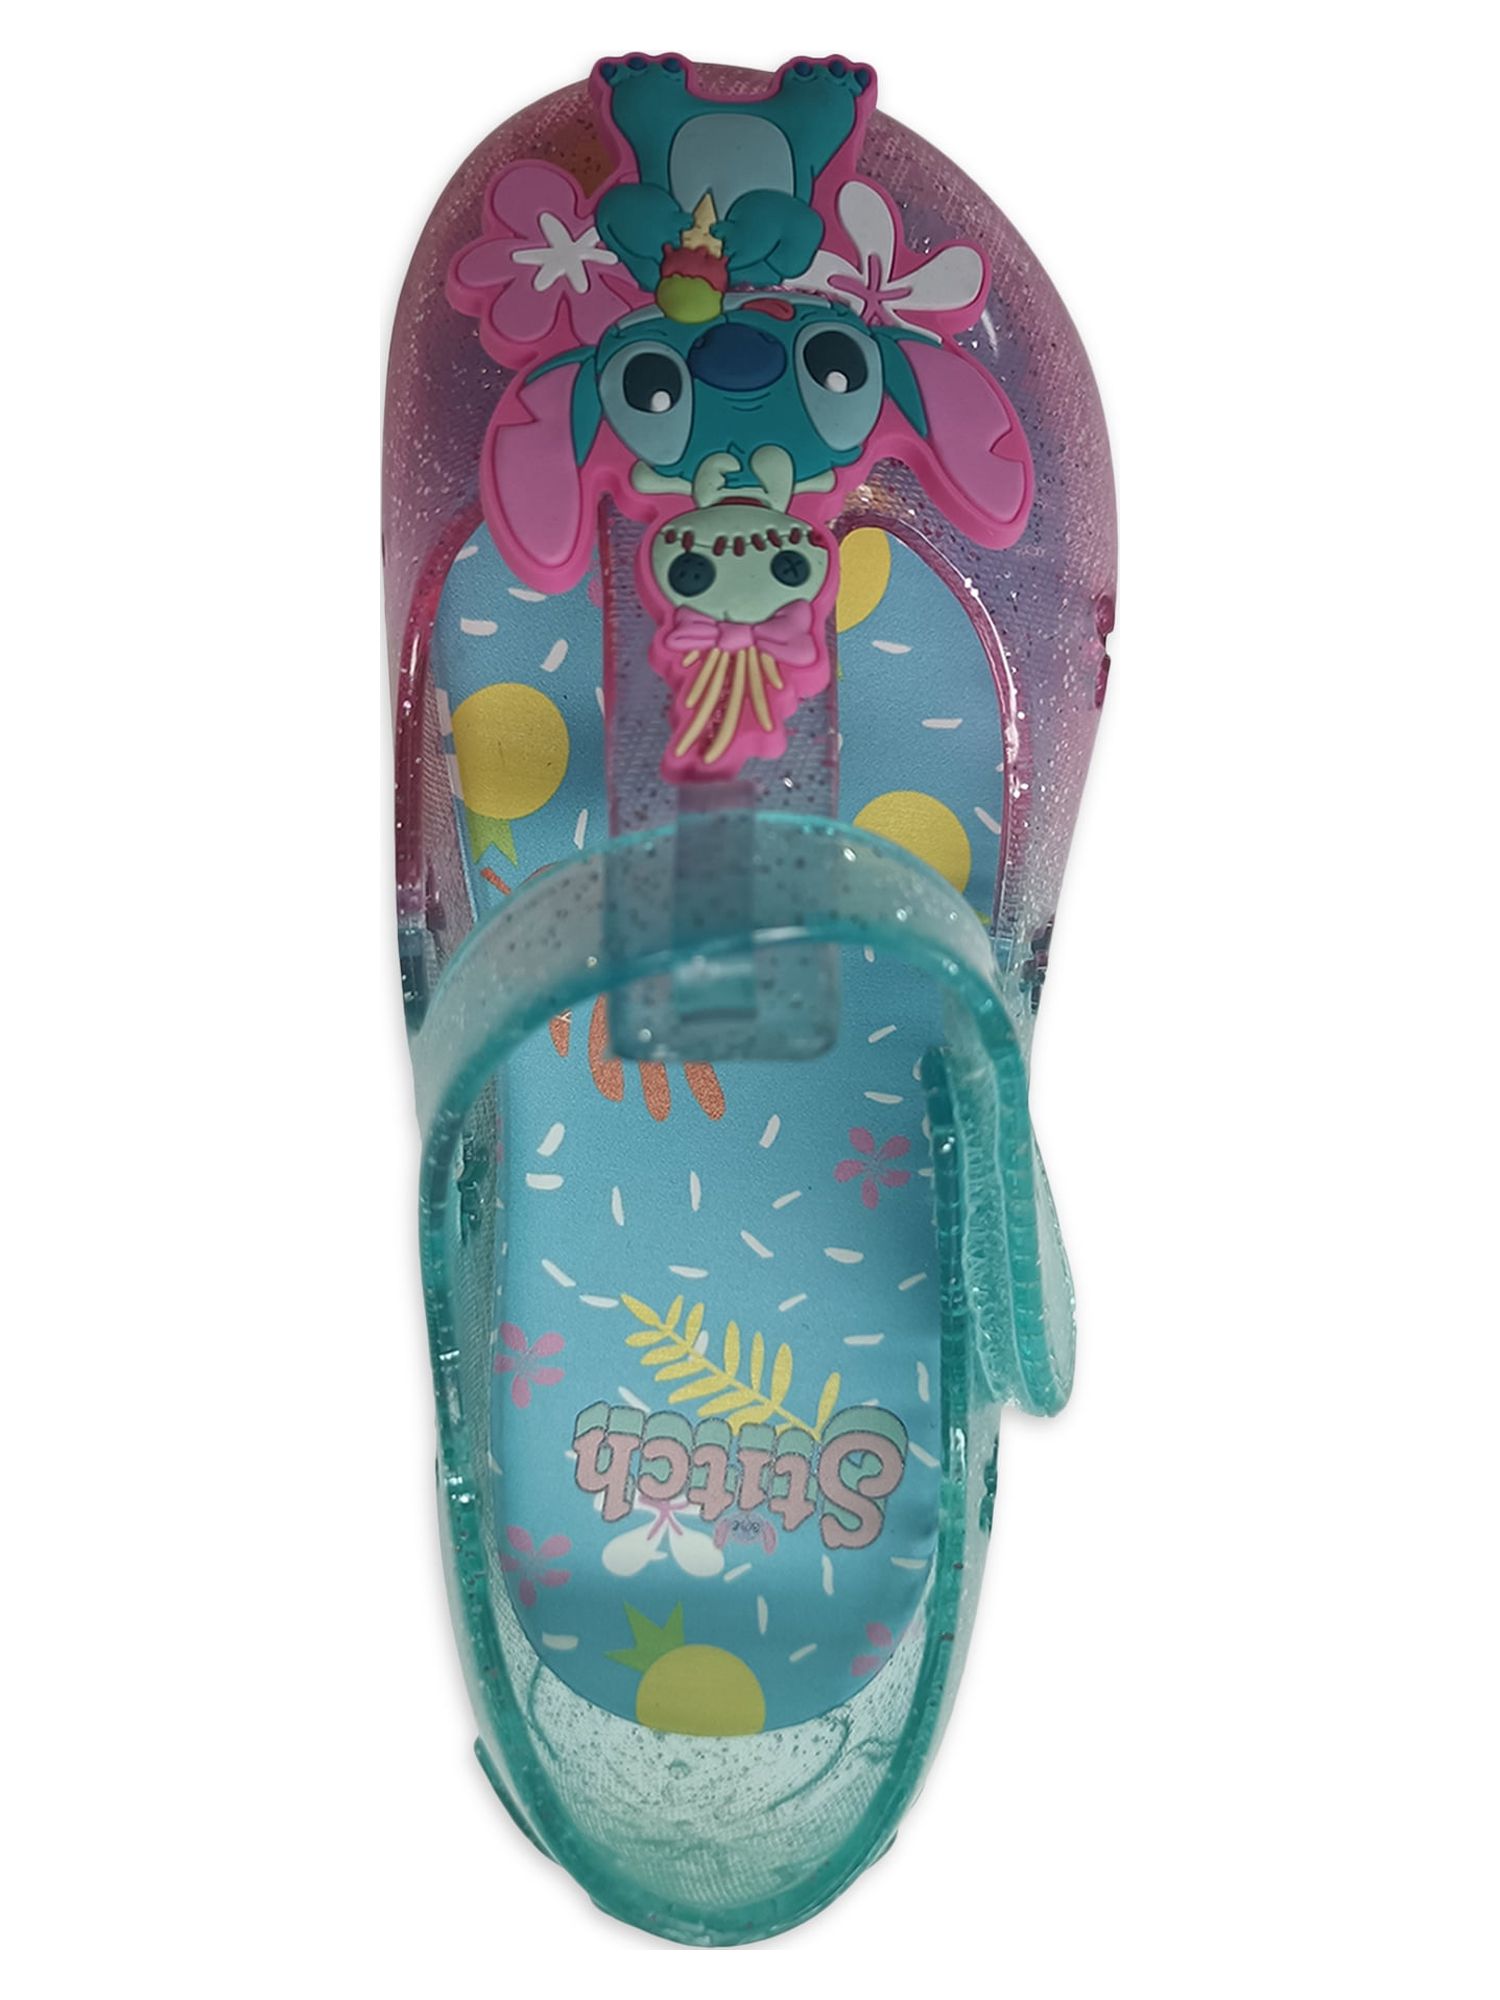 Disney Lilo & Stitch Toddler Girls Tropical Casual Jelly Shoe, Sizes 7-12 - image 4 of 6